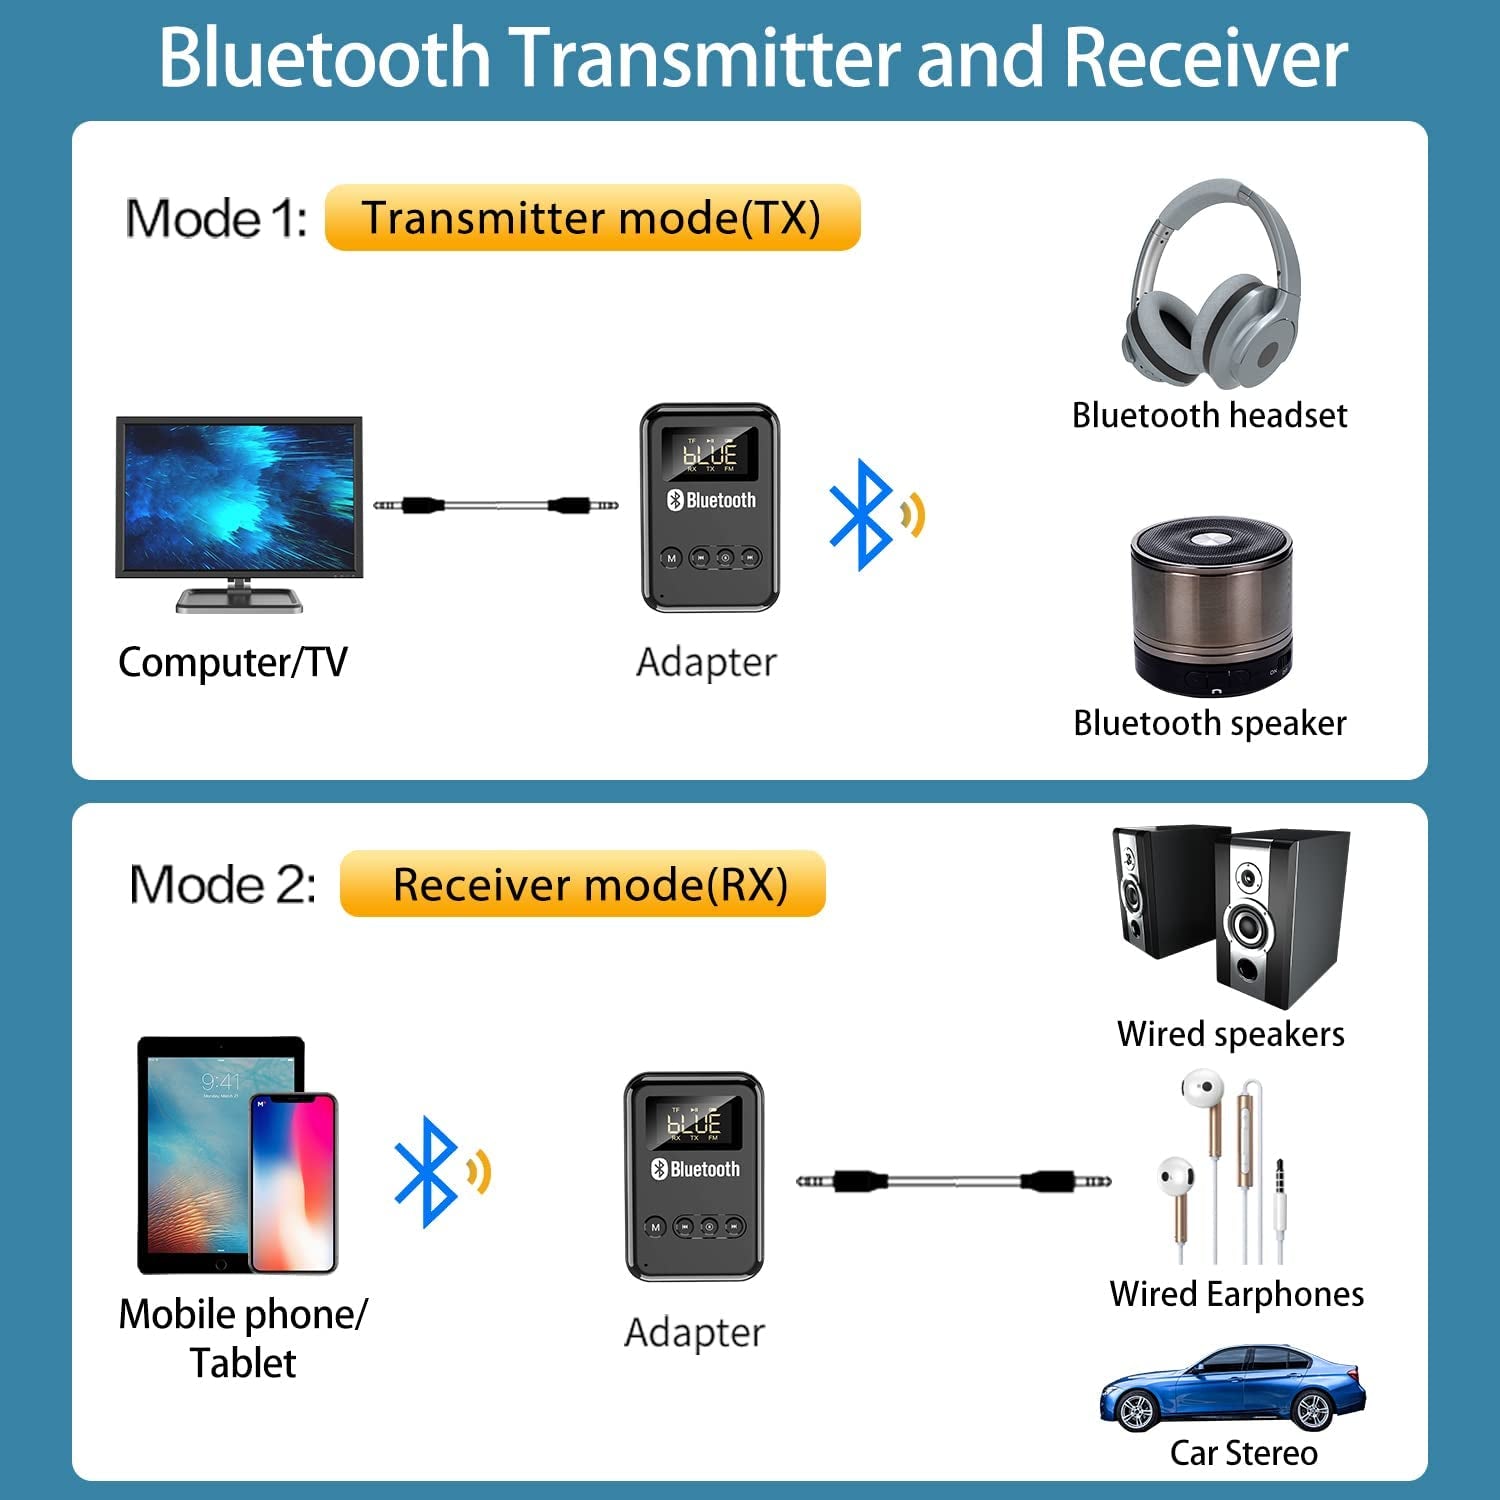 Bluetooth Audio Transmitter Receiver, V5.0 Bluetooth Adapter for TV to Headphones, with LCD Screen, 4-In-1 (TX RX FM TF) Wireless AUX Adapter for Tv/Car/Pc/Mp3 Player/Home Theater/Speakers